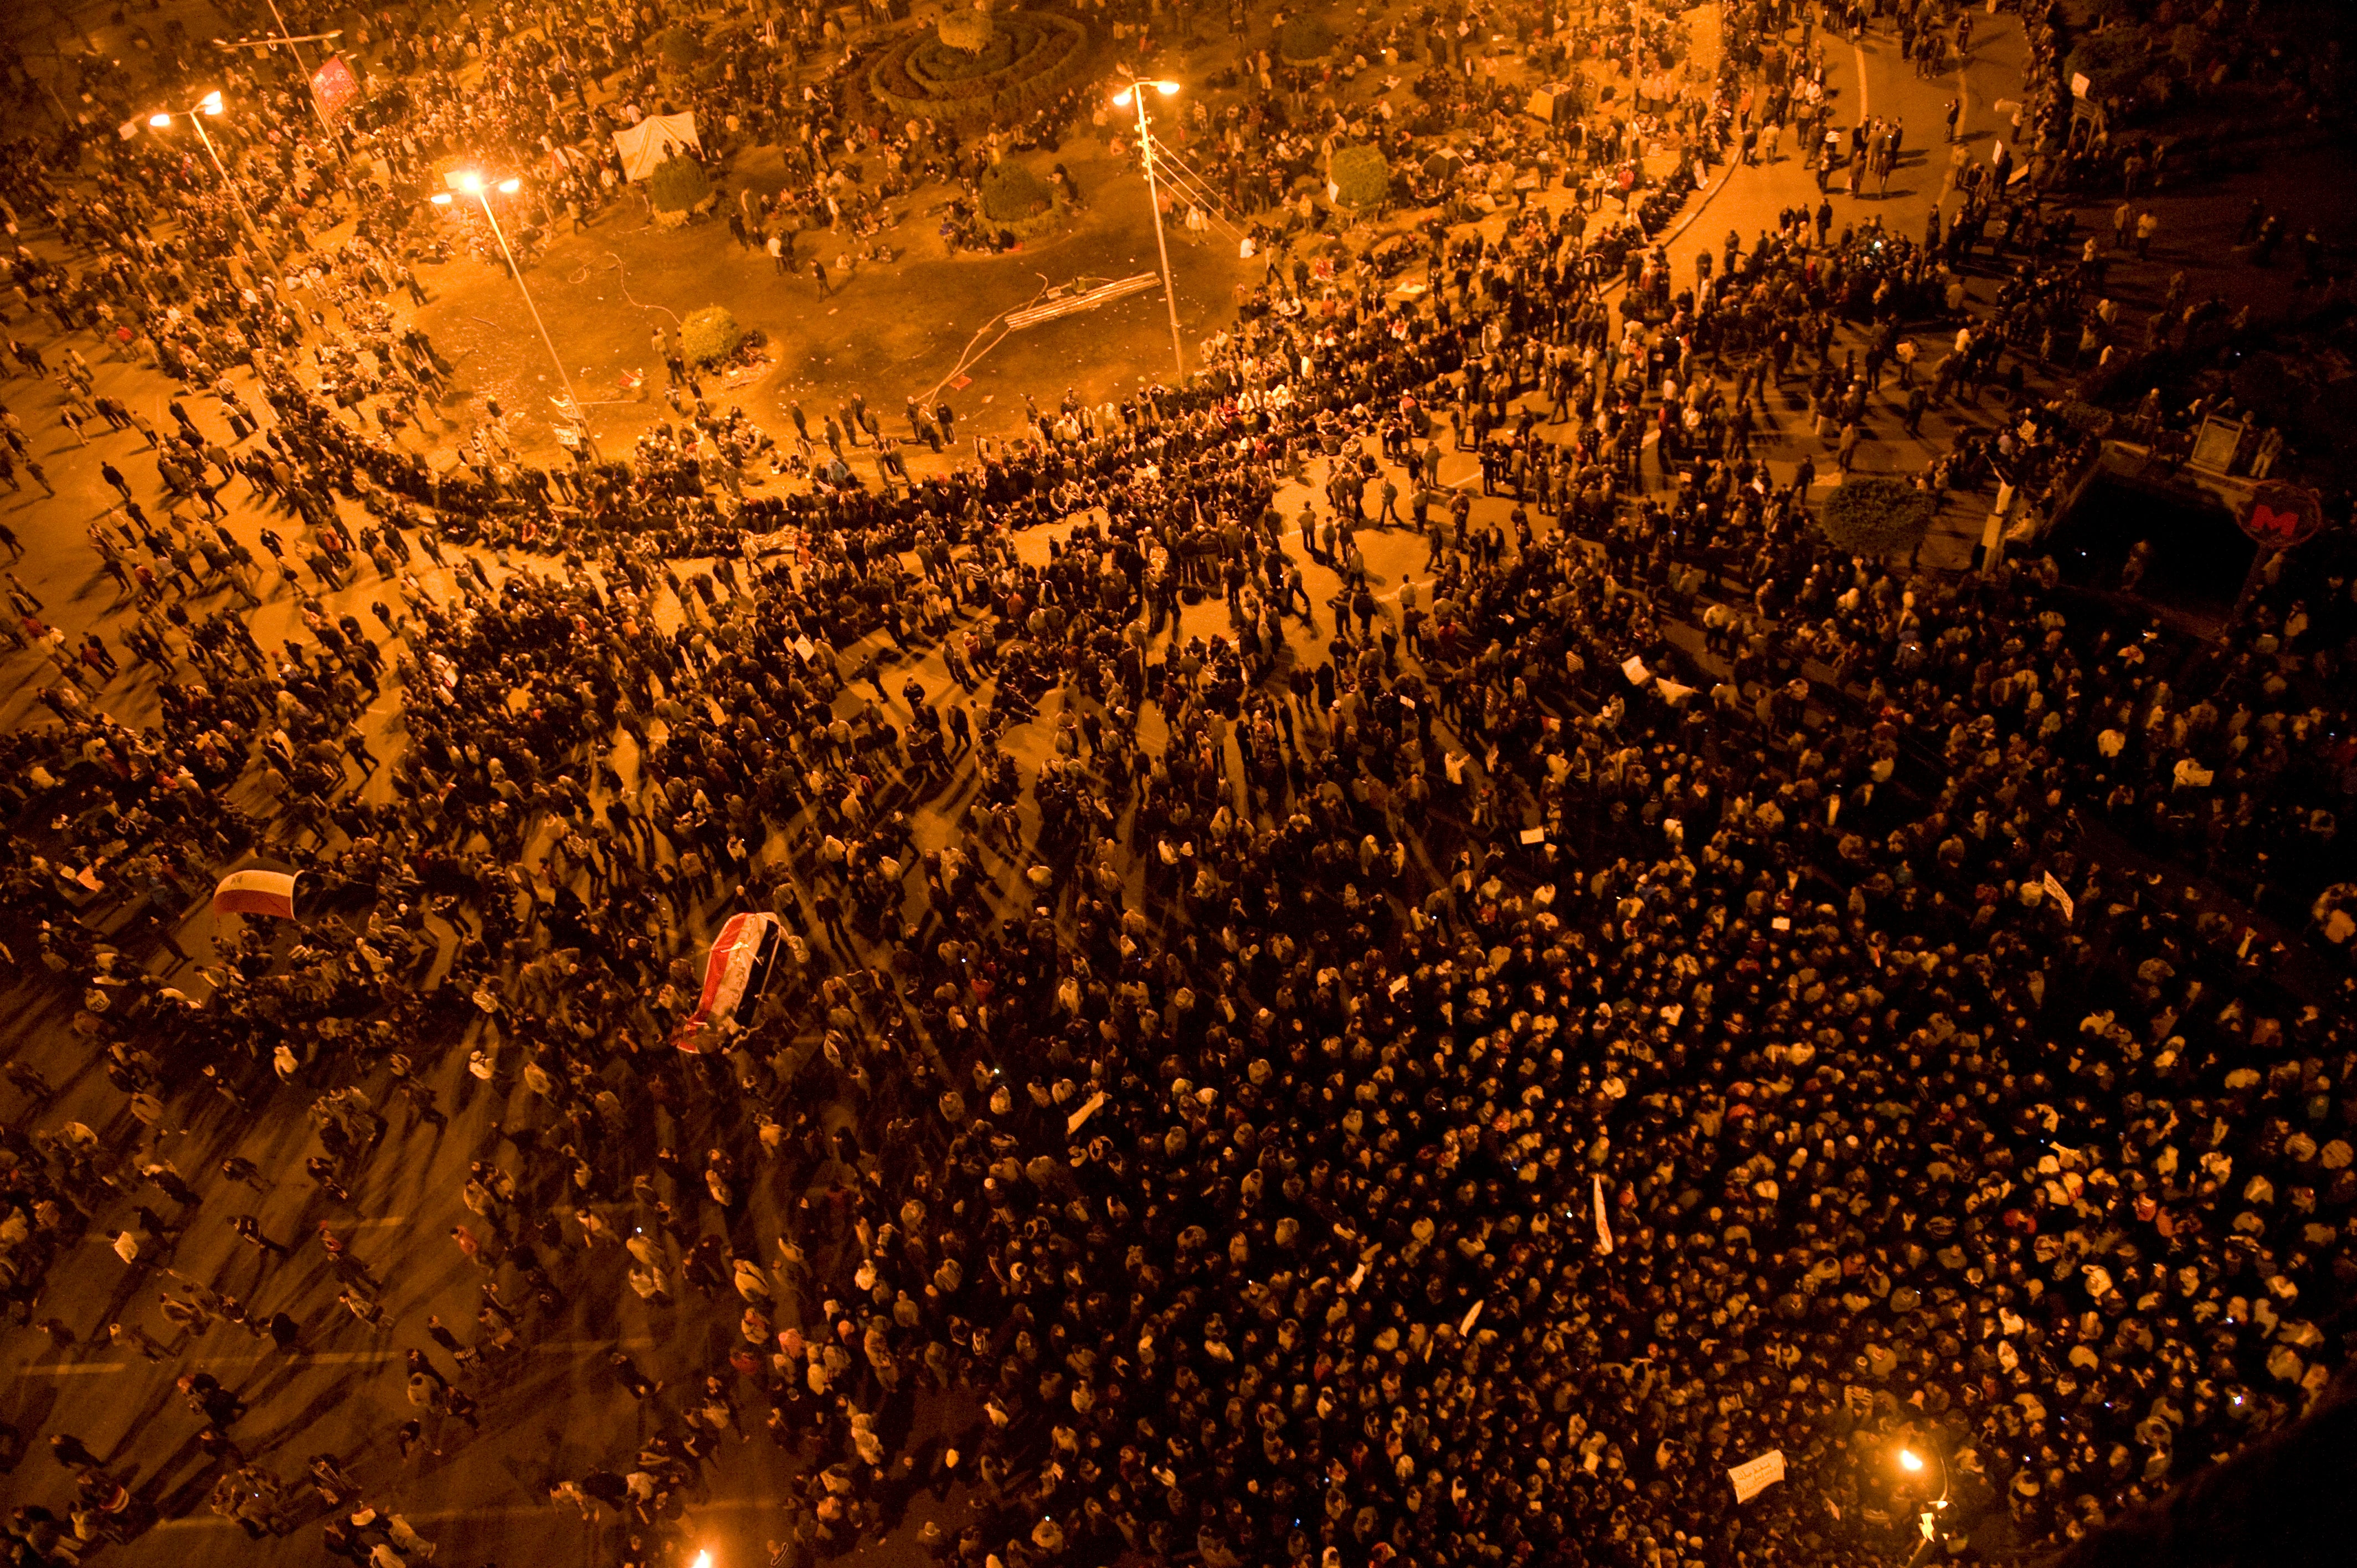 Thousands gather in Cairo's Tahrir Square on 30 January 2011, five days after protests began there against autocrat Hosni Mubarak